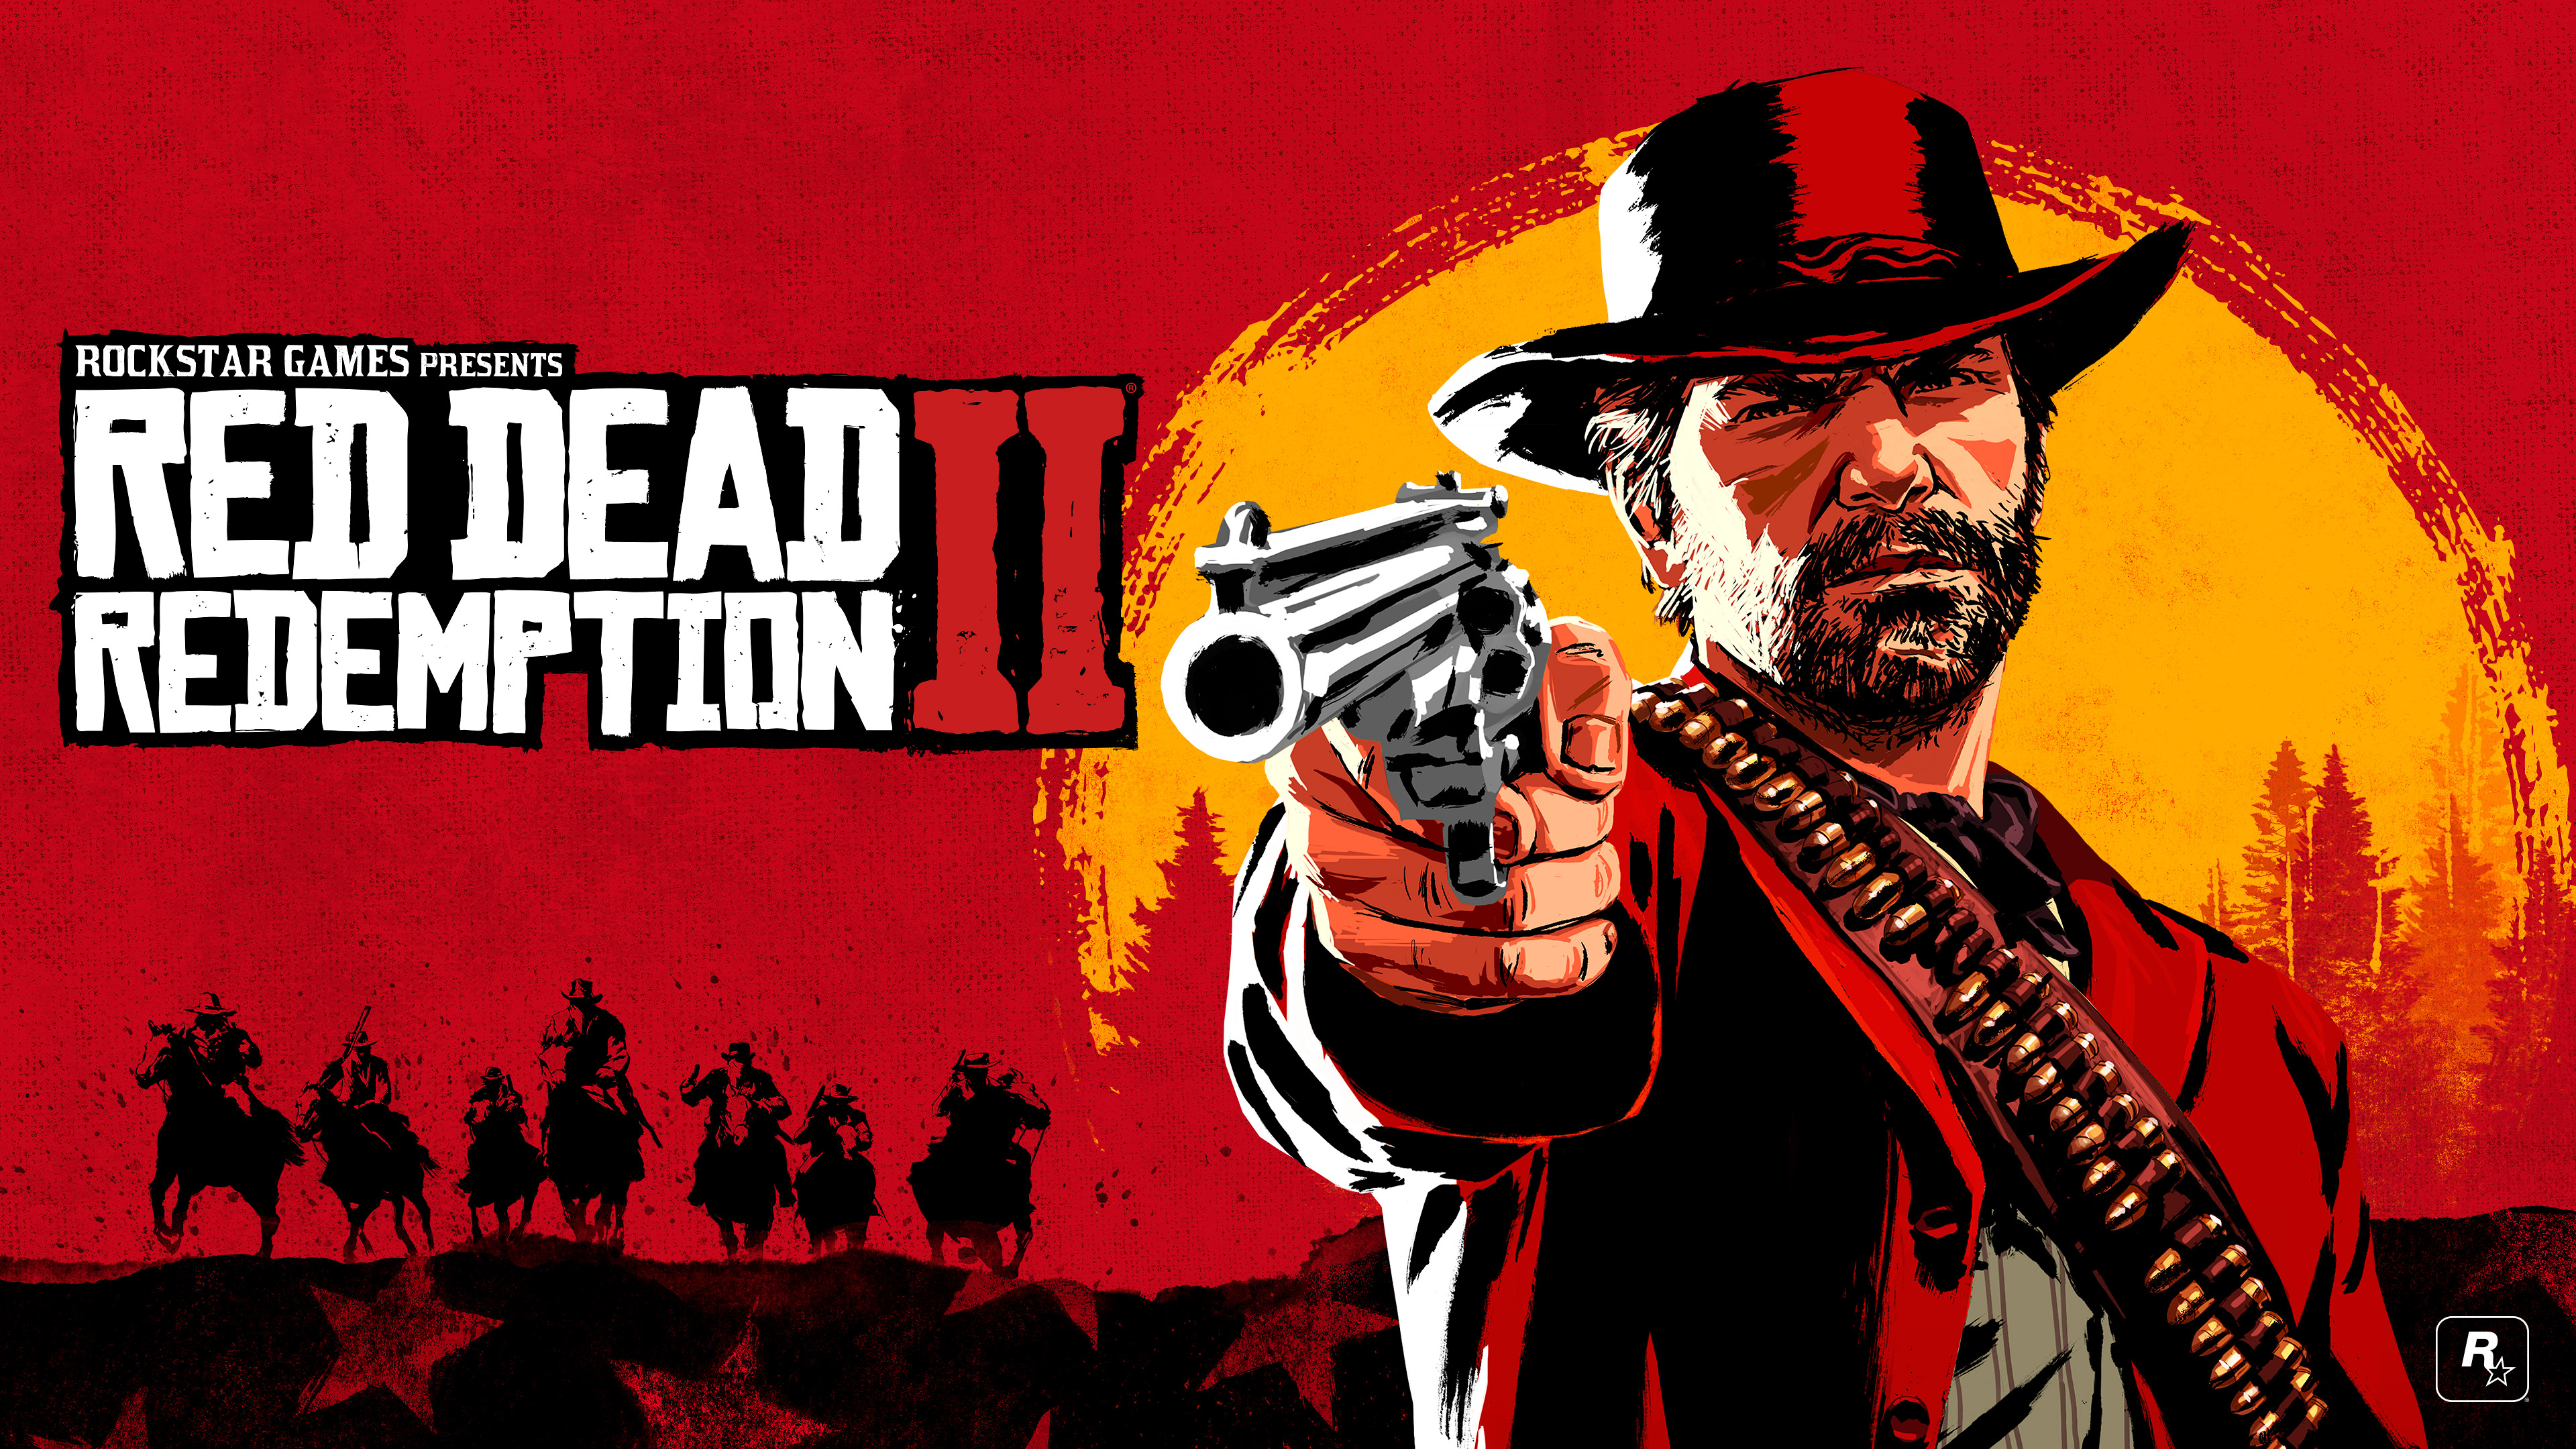 Red Dead Redemption the second installment of the popular video game